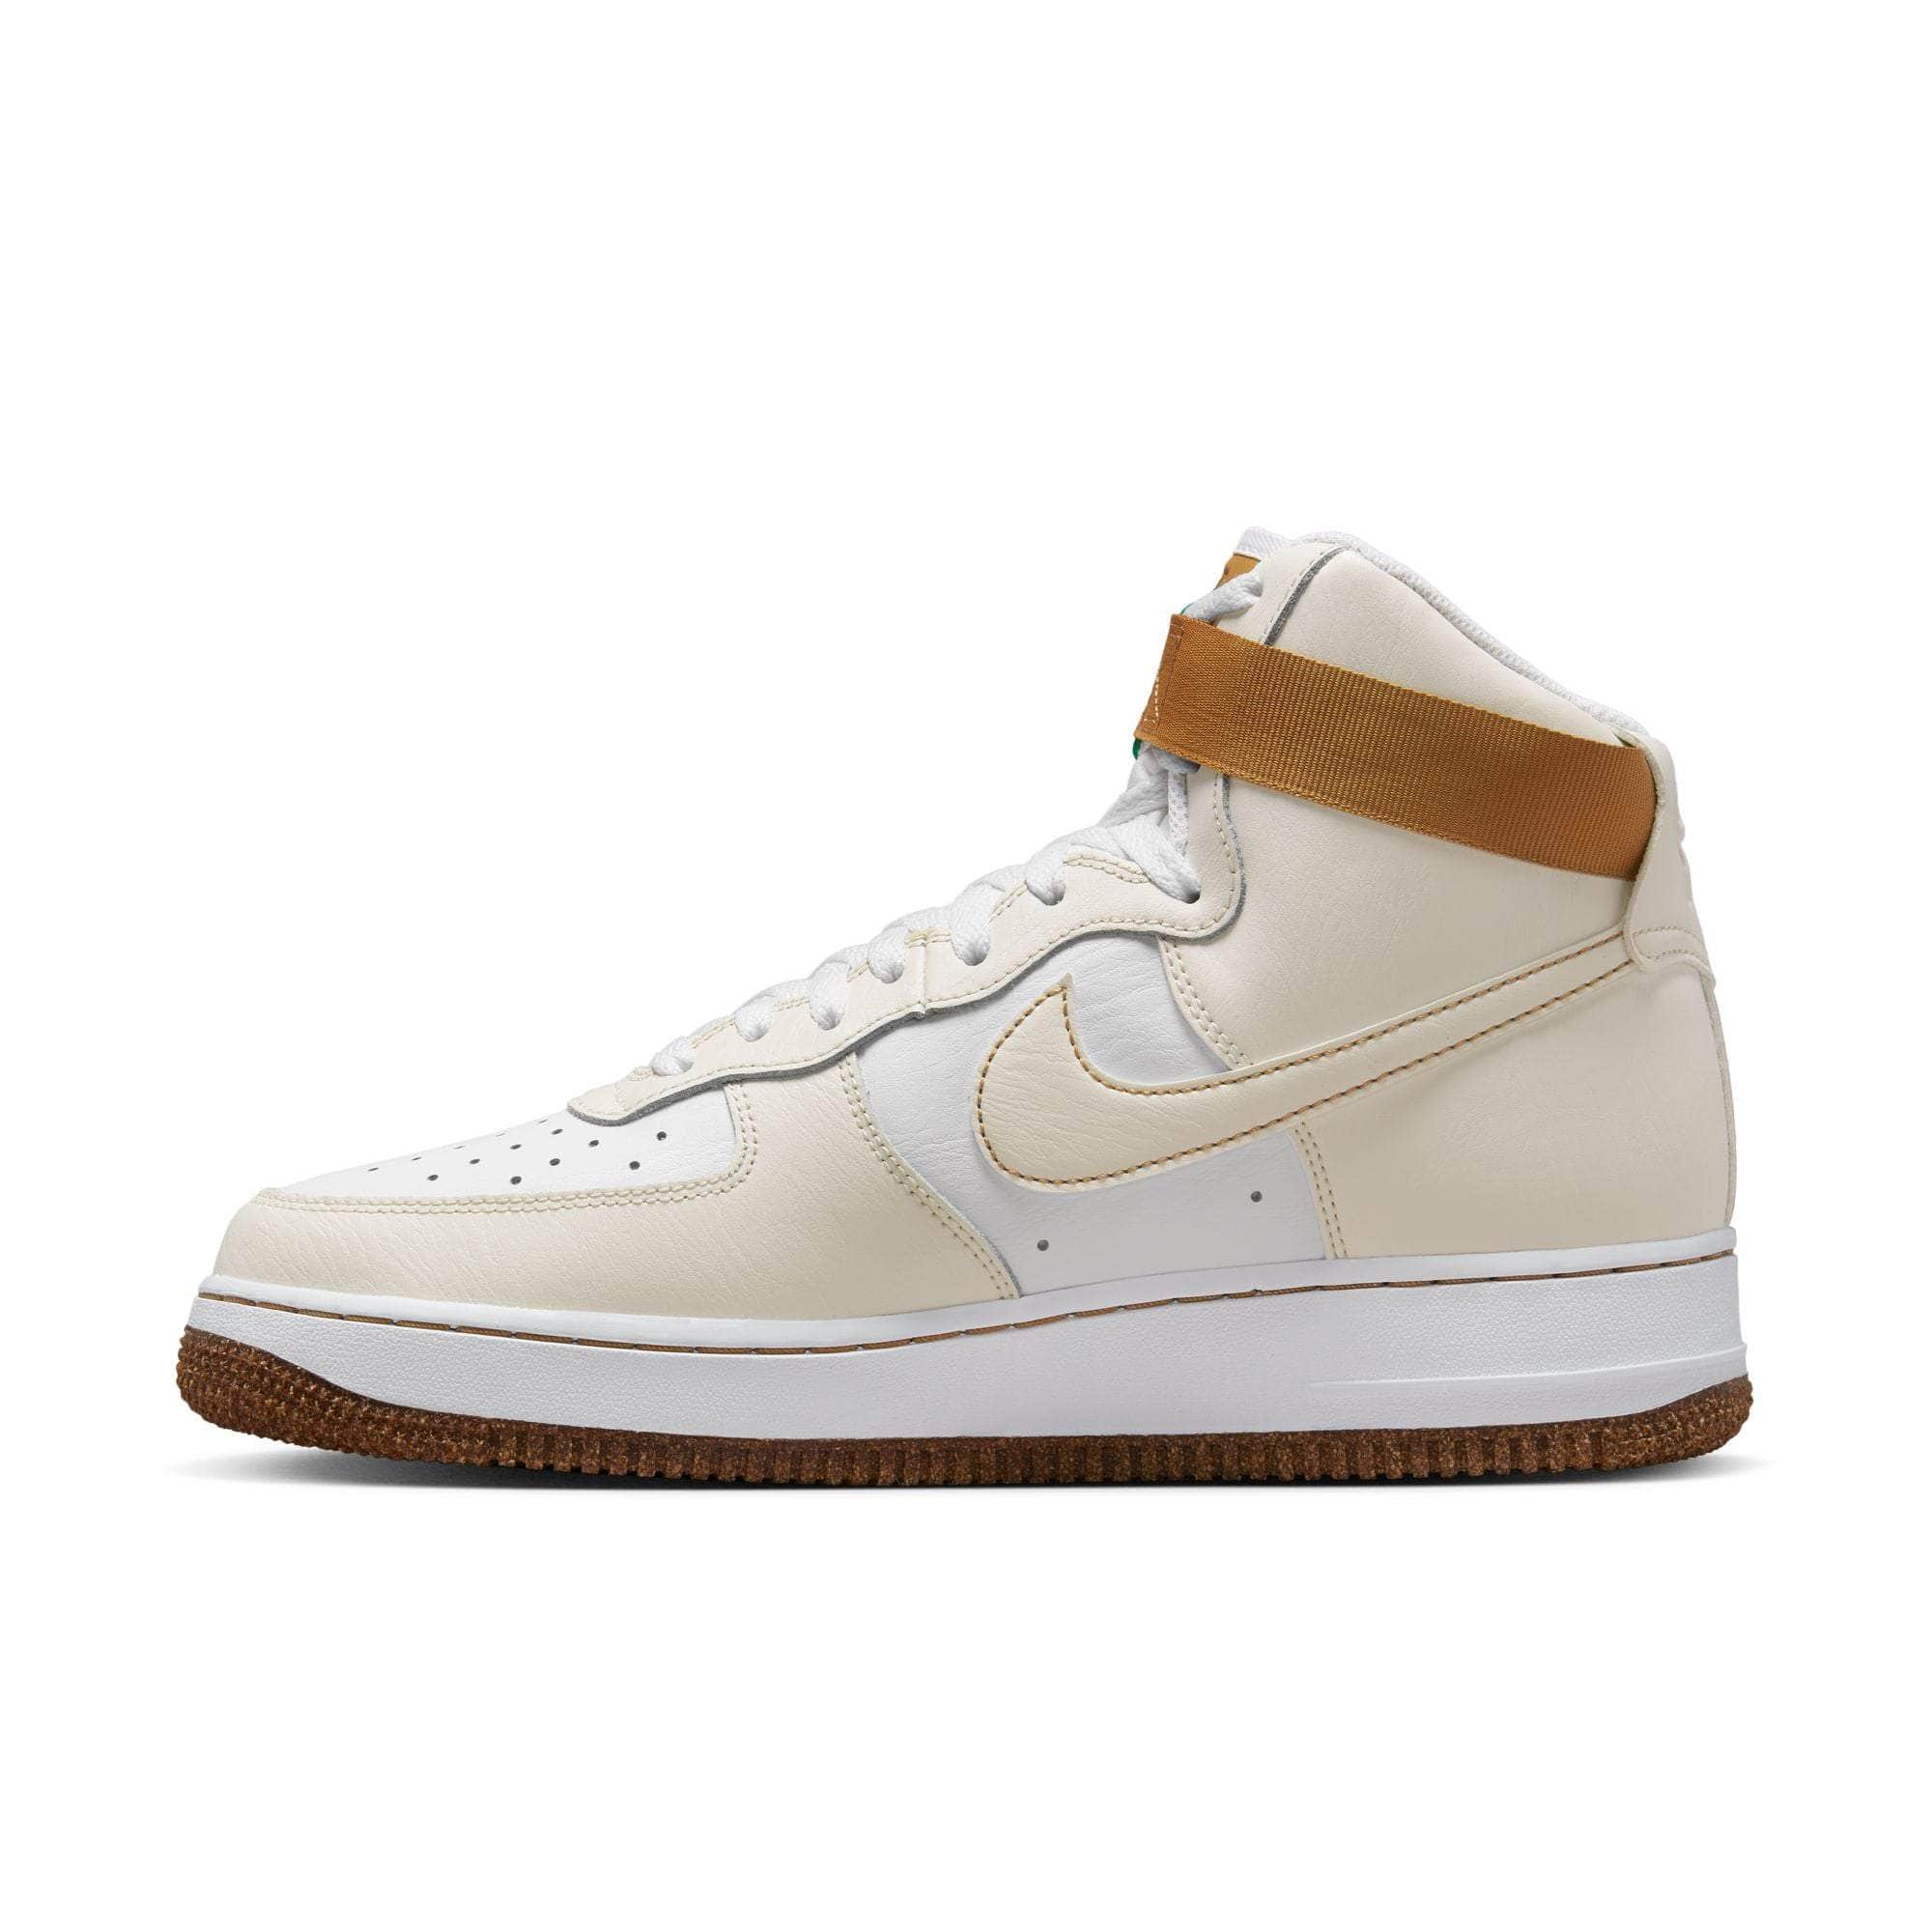 Nike Air Force 1 High '07 LV8 EMB Men's Shoes Size-12